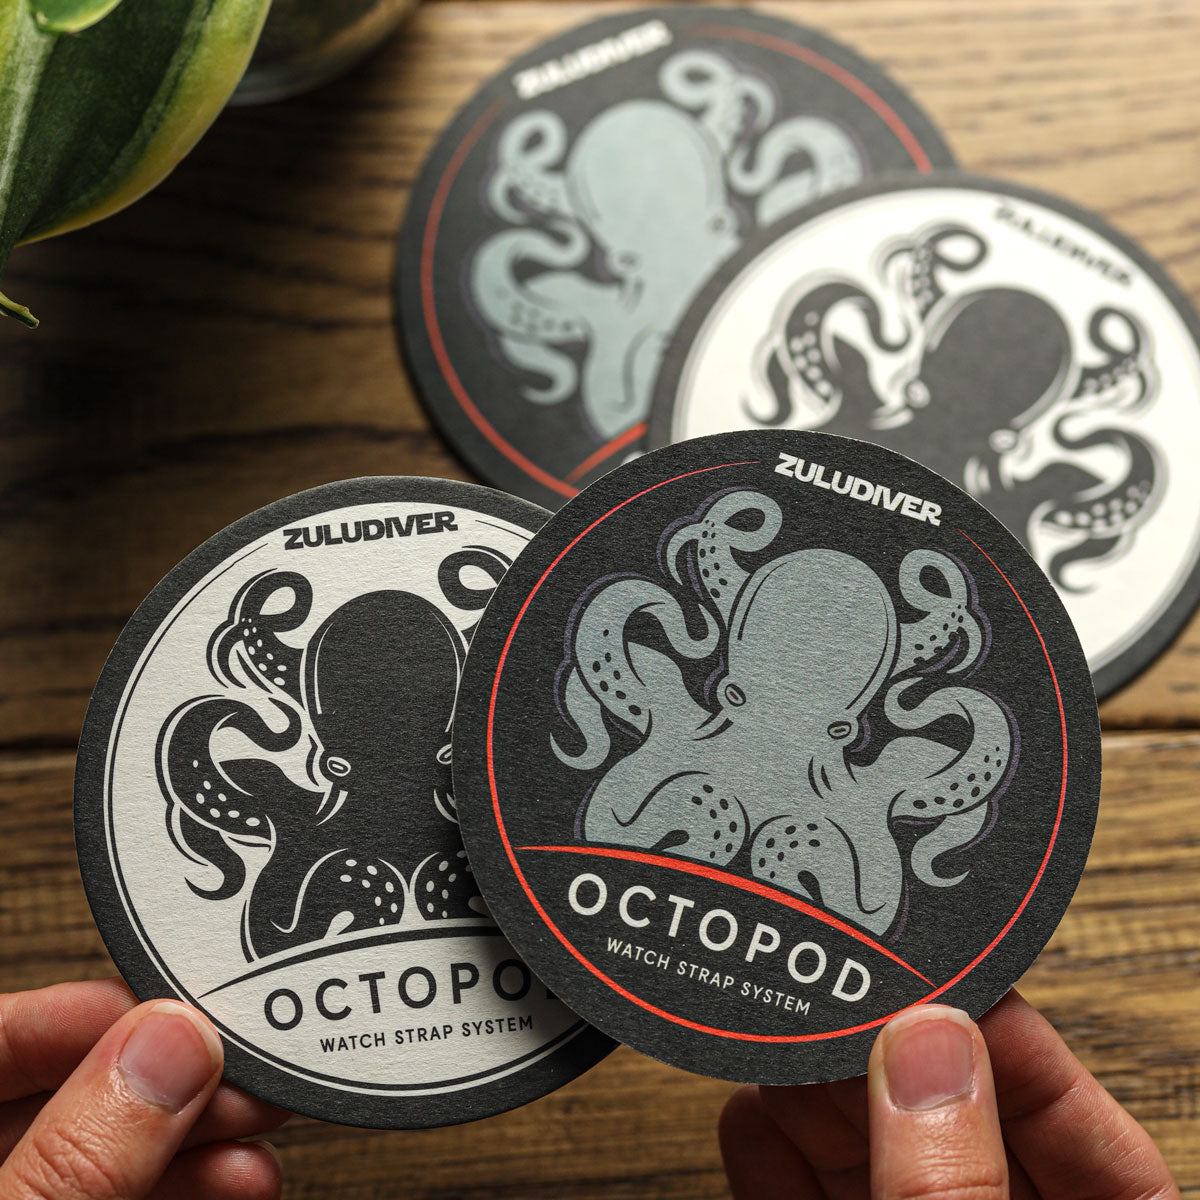 OctoPod Super Absorbent Beer Mats (Pack of 5) - additional image 2